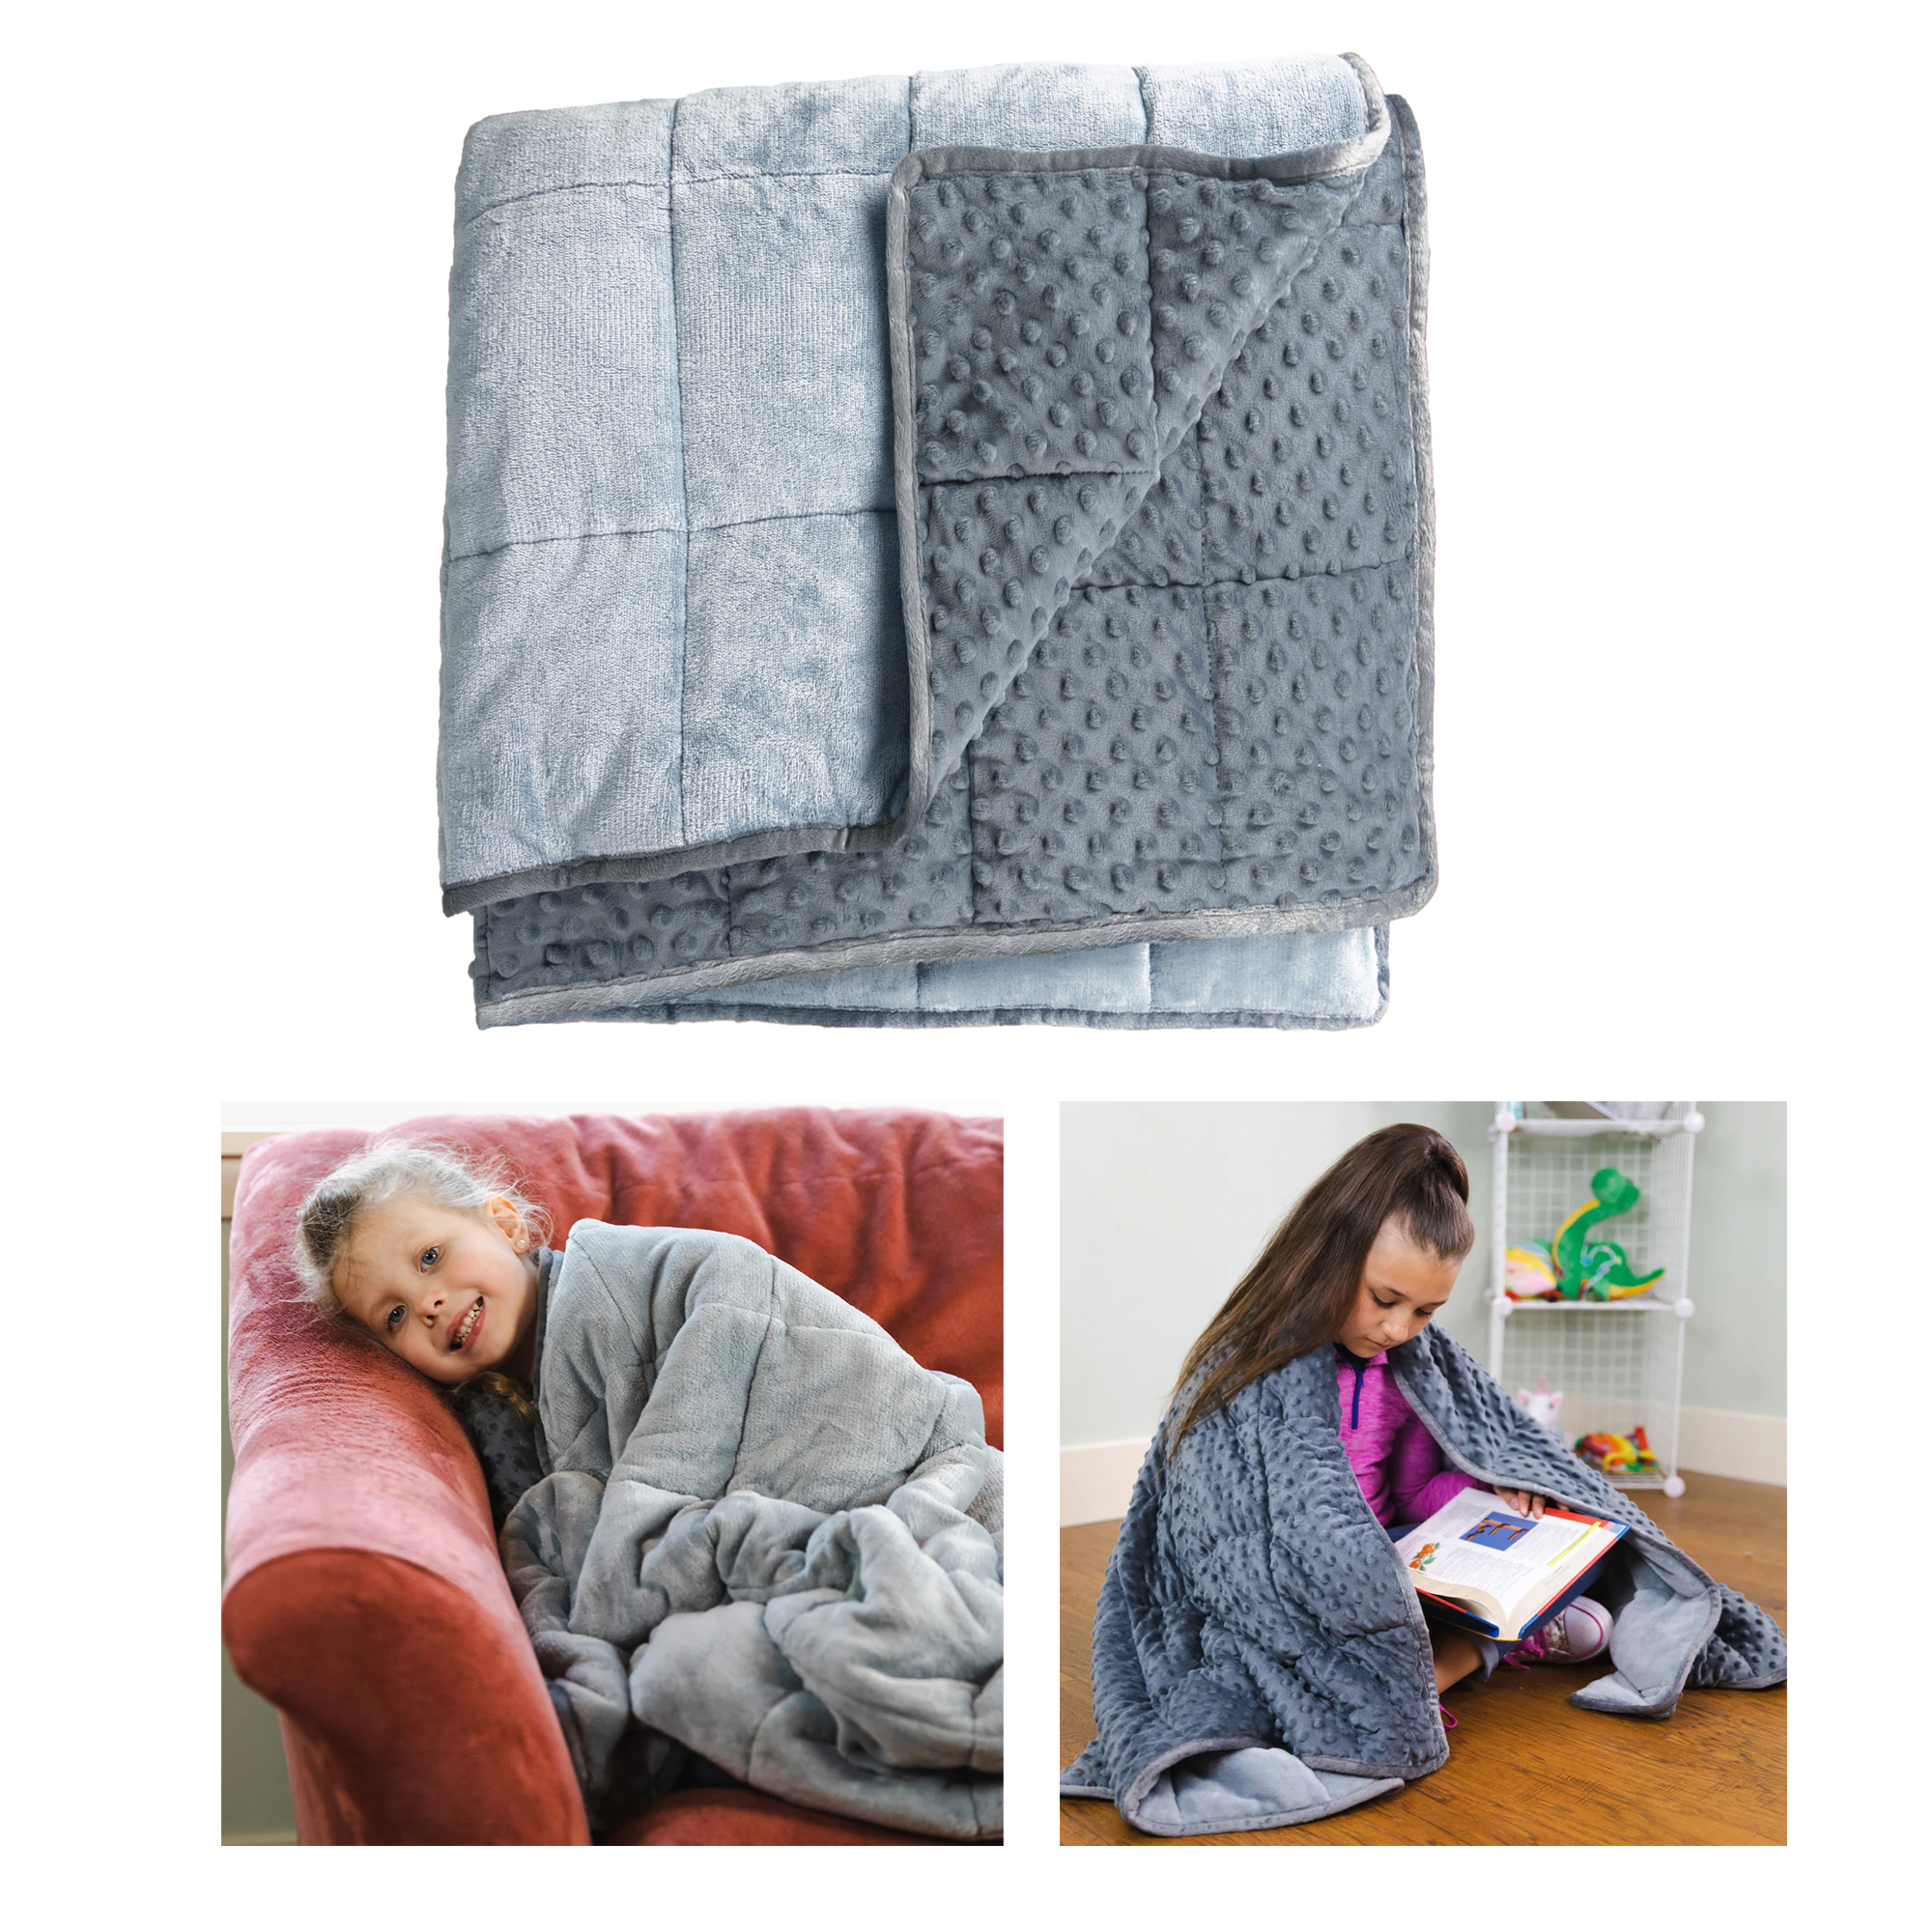 Bouncyband Sensory Weighted Dual Texture Shoulder Wrap for Kids, 40" x 12"